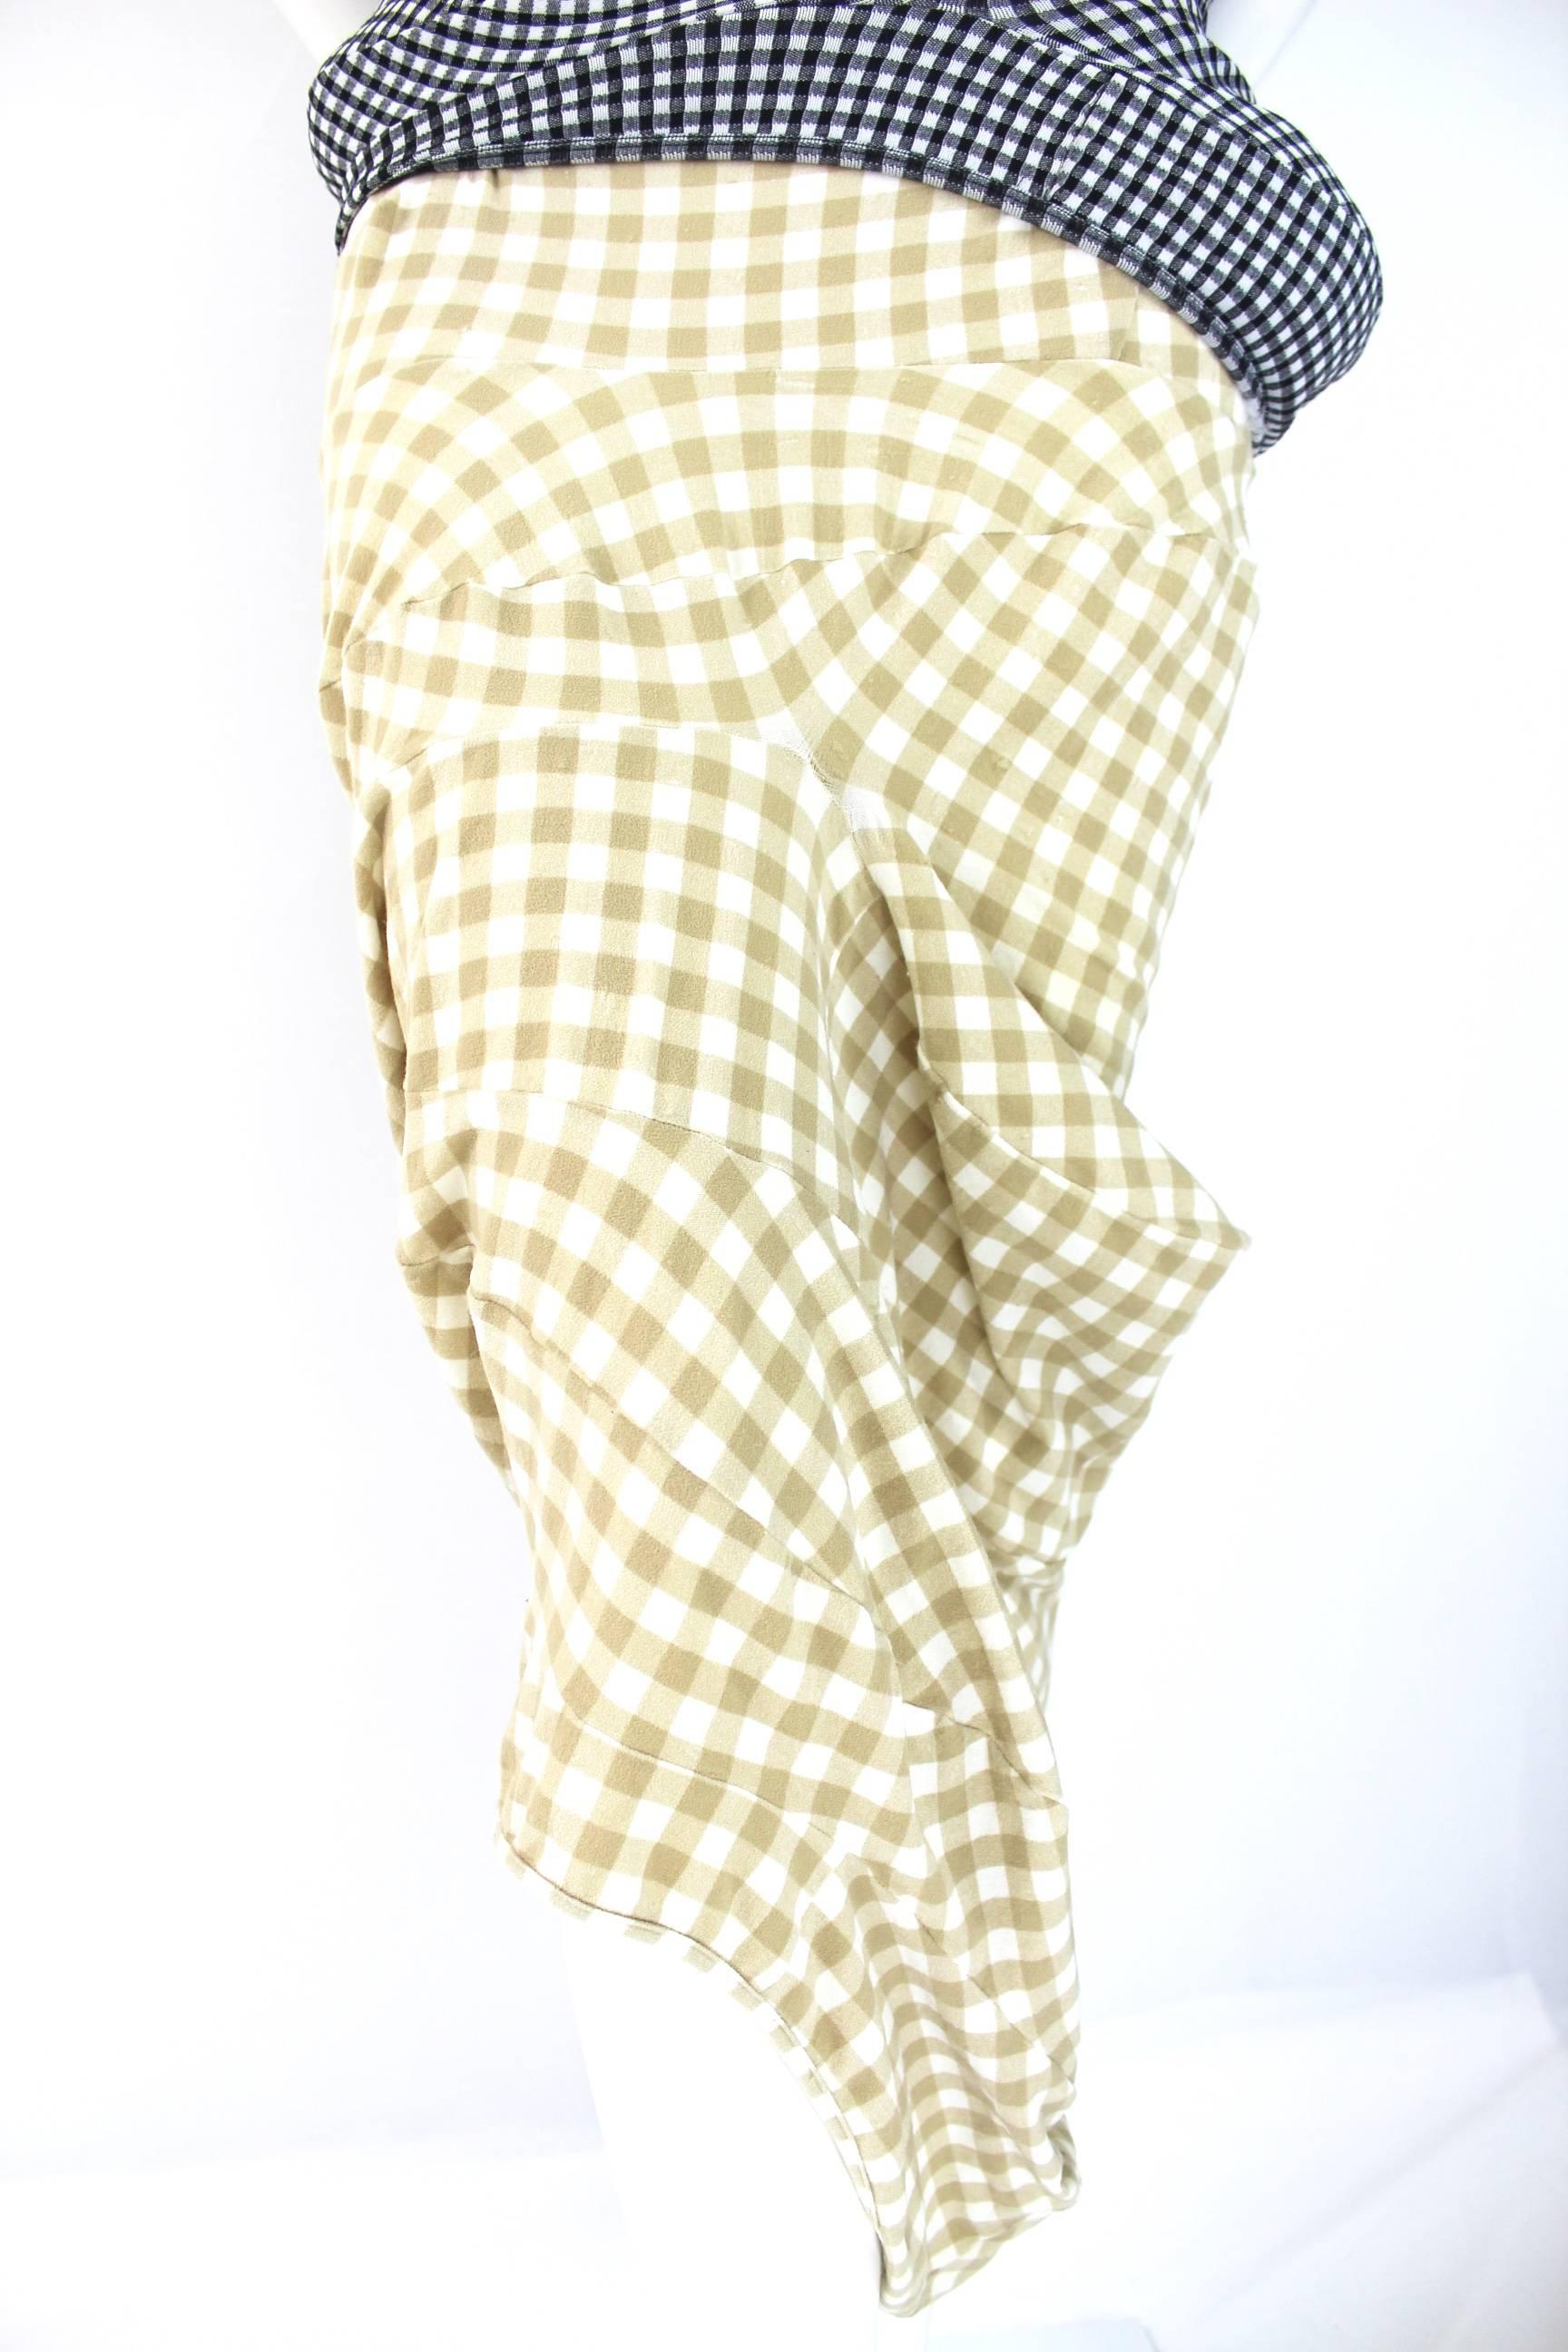 Comme des Garcons AD 1996 'Body Meets Dress' Gingham Skirt In Excellent Condition In Bath, GB